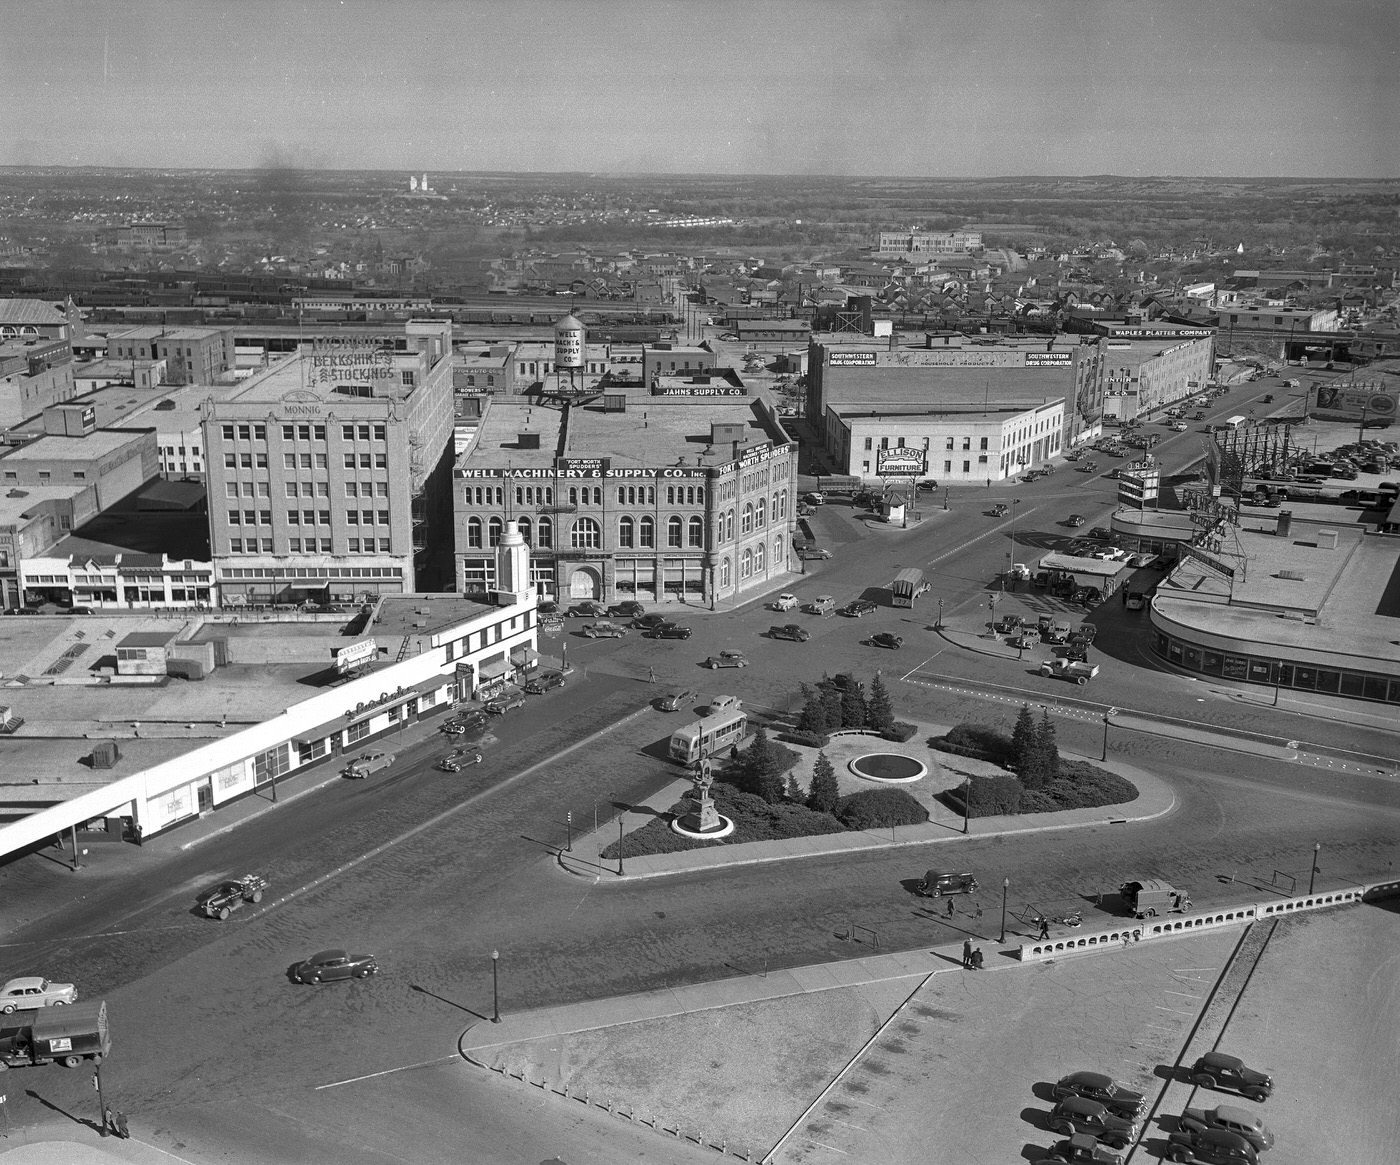 A view seen from Texas & Pacific station, 1945